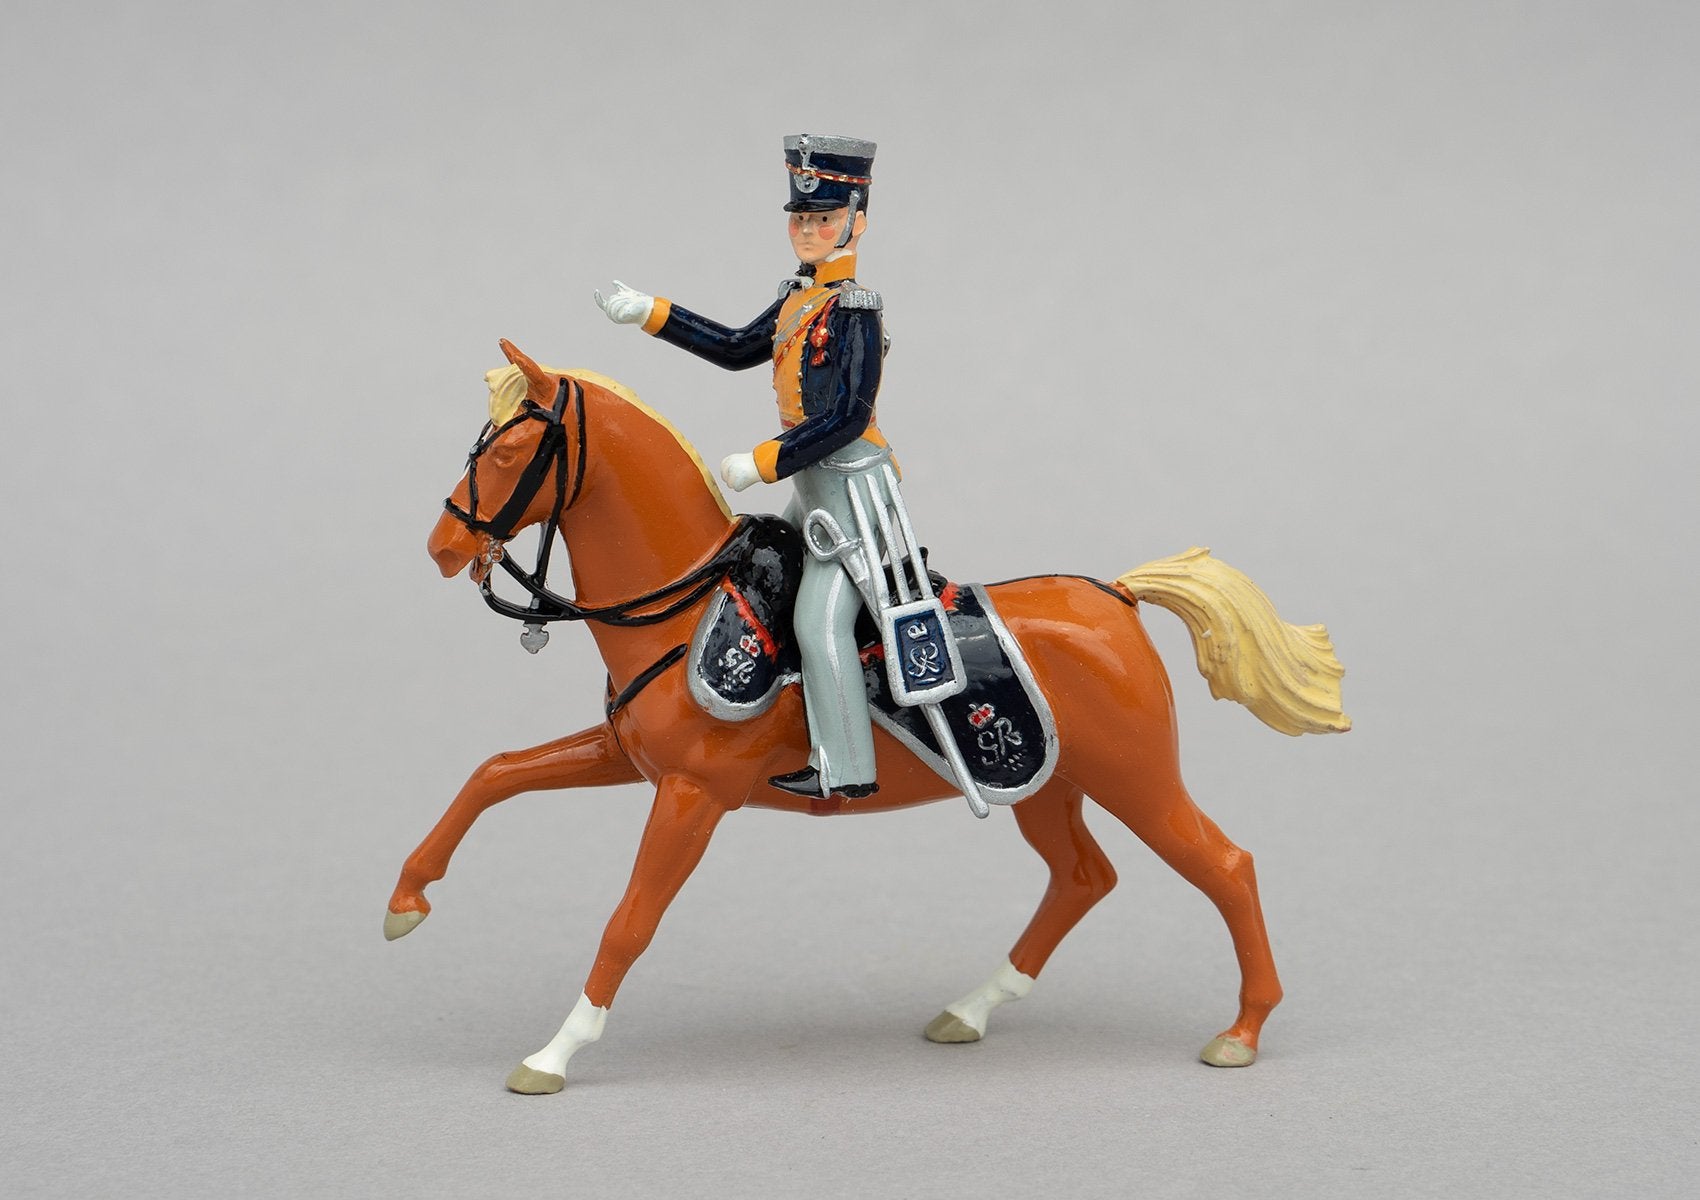 Set 115 Major Henry Percy, Waterloo 1815 | British | Napoleonic Wars | British aide-de-campe to the Duke of Wellington at Waterloo. Napoleonic Wars. Relayed news of victory to London. He is in the uniform of his regiment, the 14th Light Dragoons. Single mounted figure on chestnut horse | Waterloo | © Imperial Productions | Sculpt by David Cowe